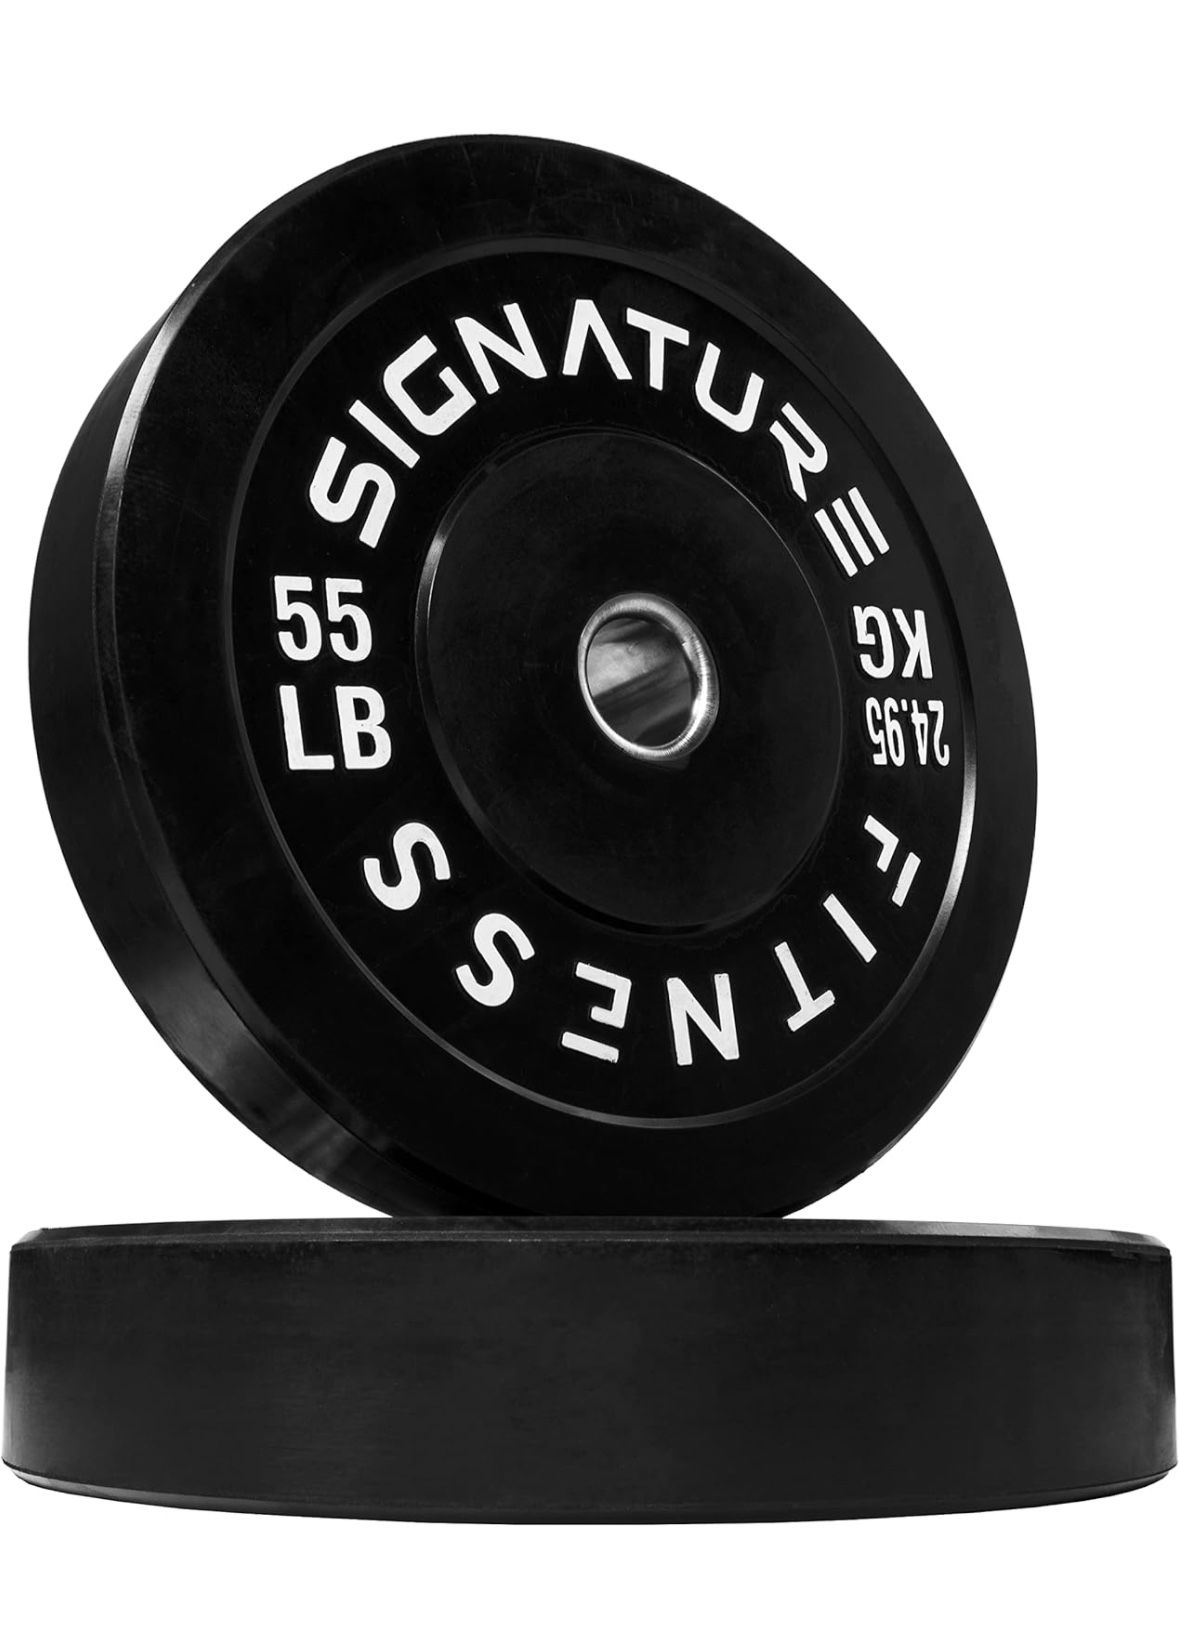 Signature Fitness 2" Olympic Bumper Plate Weight Plates with Steel Hub, Pairs, Sets or Sets with 7FT Olympic Barbell, Multiple Options